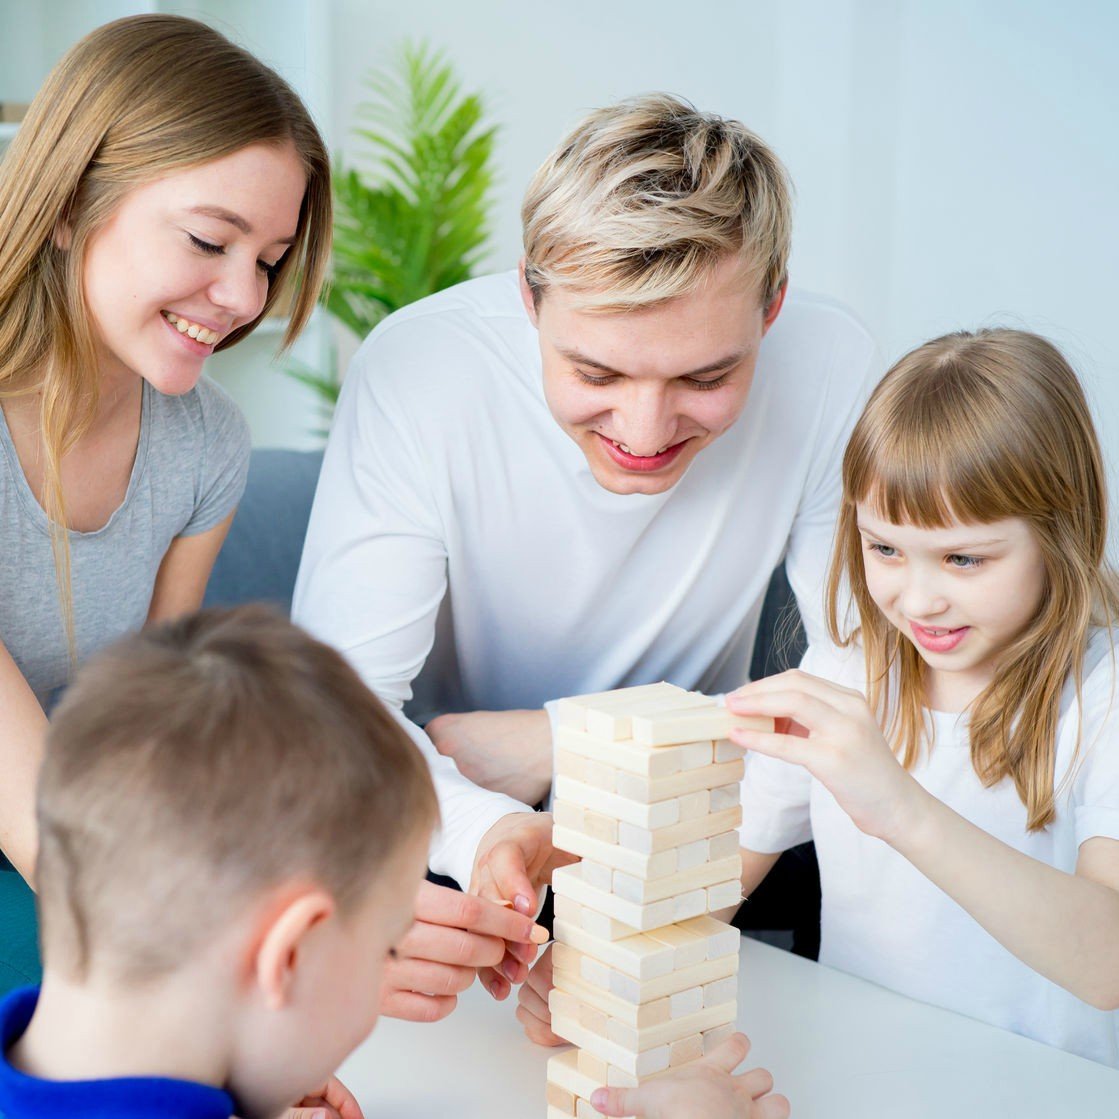 10 Games To Play With Your Kids During "Family Games Week"